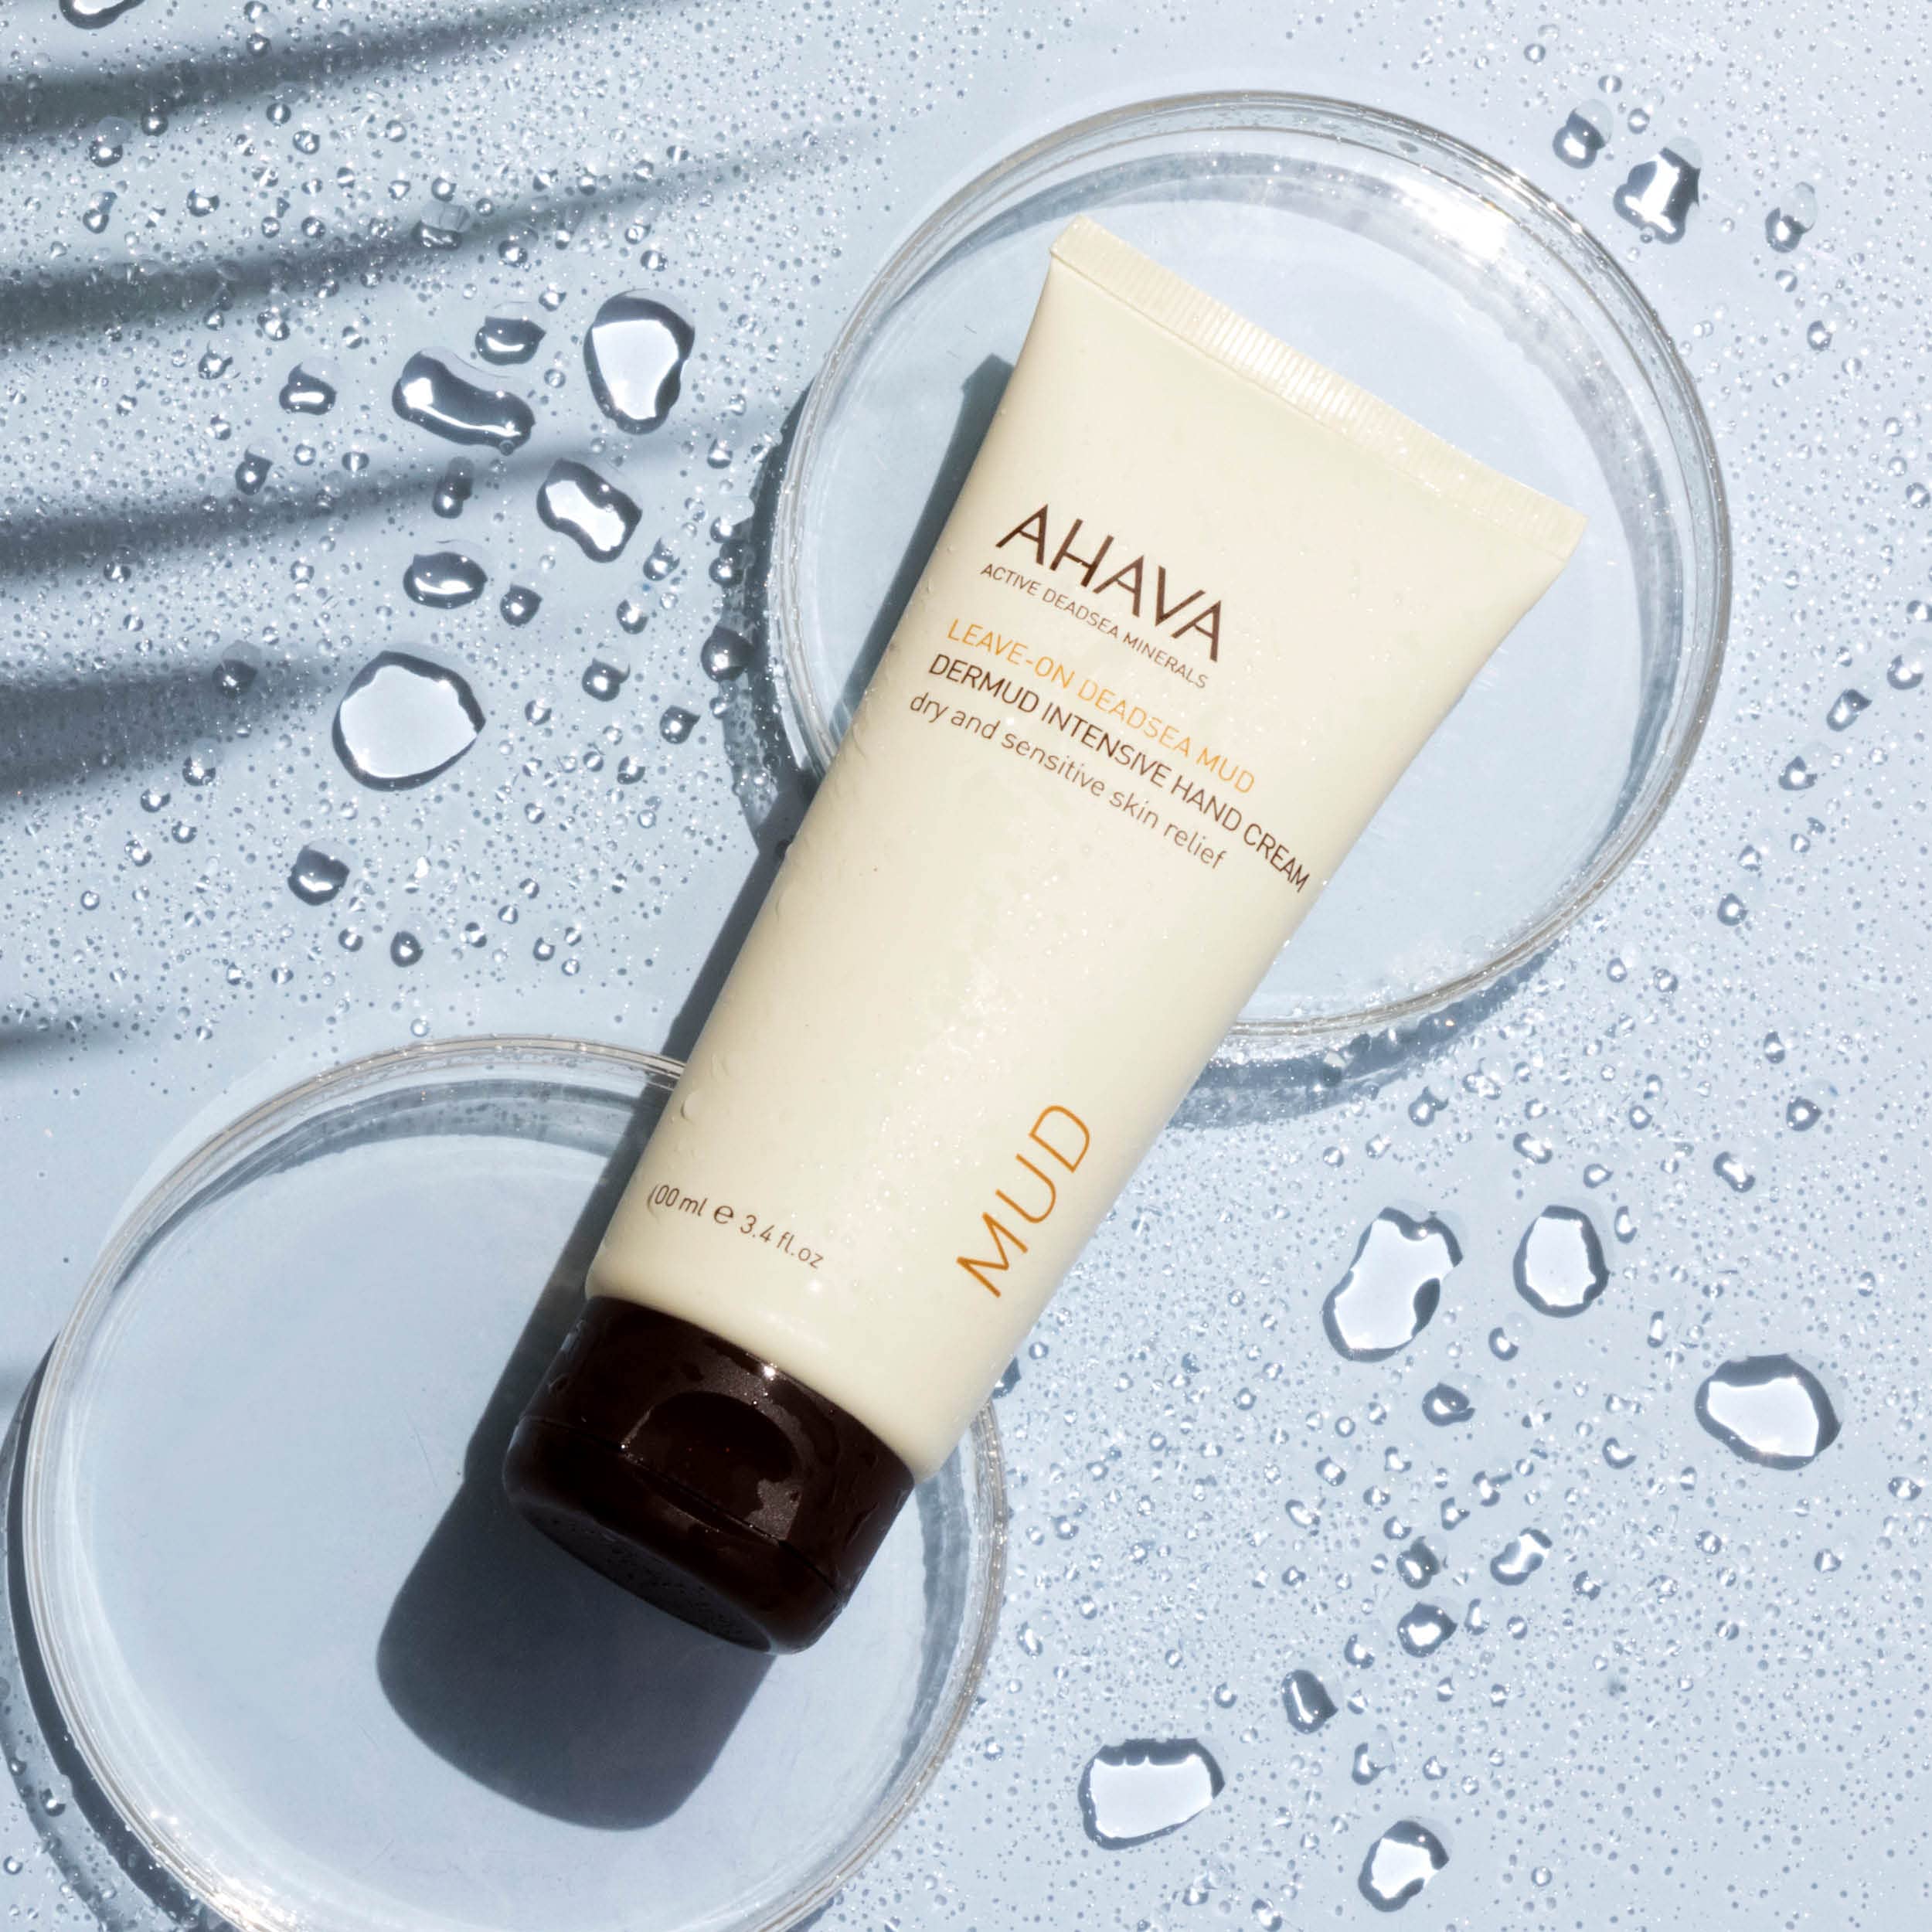 AHAVA Dermud Intensive Hand Cream - Intensely Hydrates, Soothes, Relieves Dry & Sensitive Hands, Enriched by Dermud Mud Complex, Osmoter, Aloe Vera Leaf, Jojoba Seed Oil, Zinc & Allantoin, 3.4 fl.oz